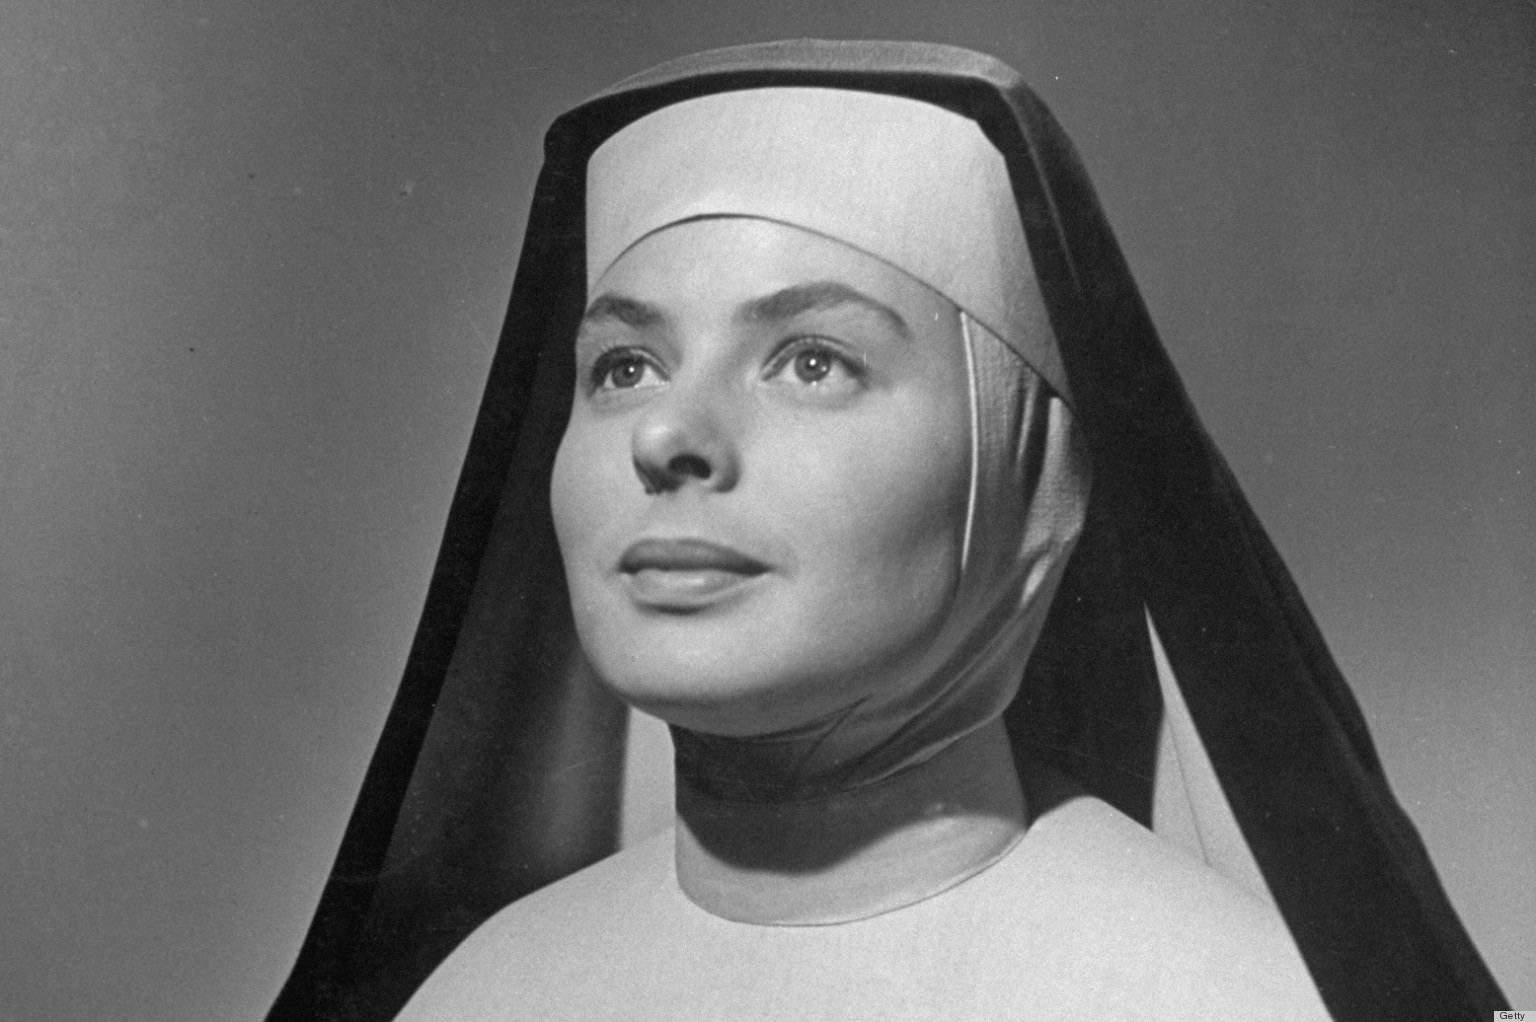 Nun Habits  How Women Of The Cloth Express Their Own Personal Style